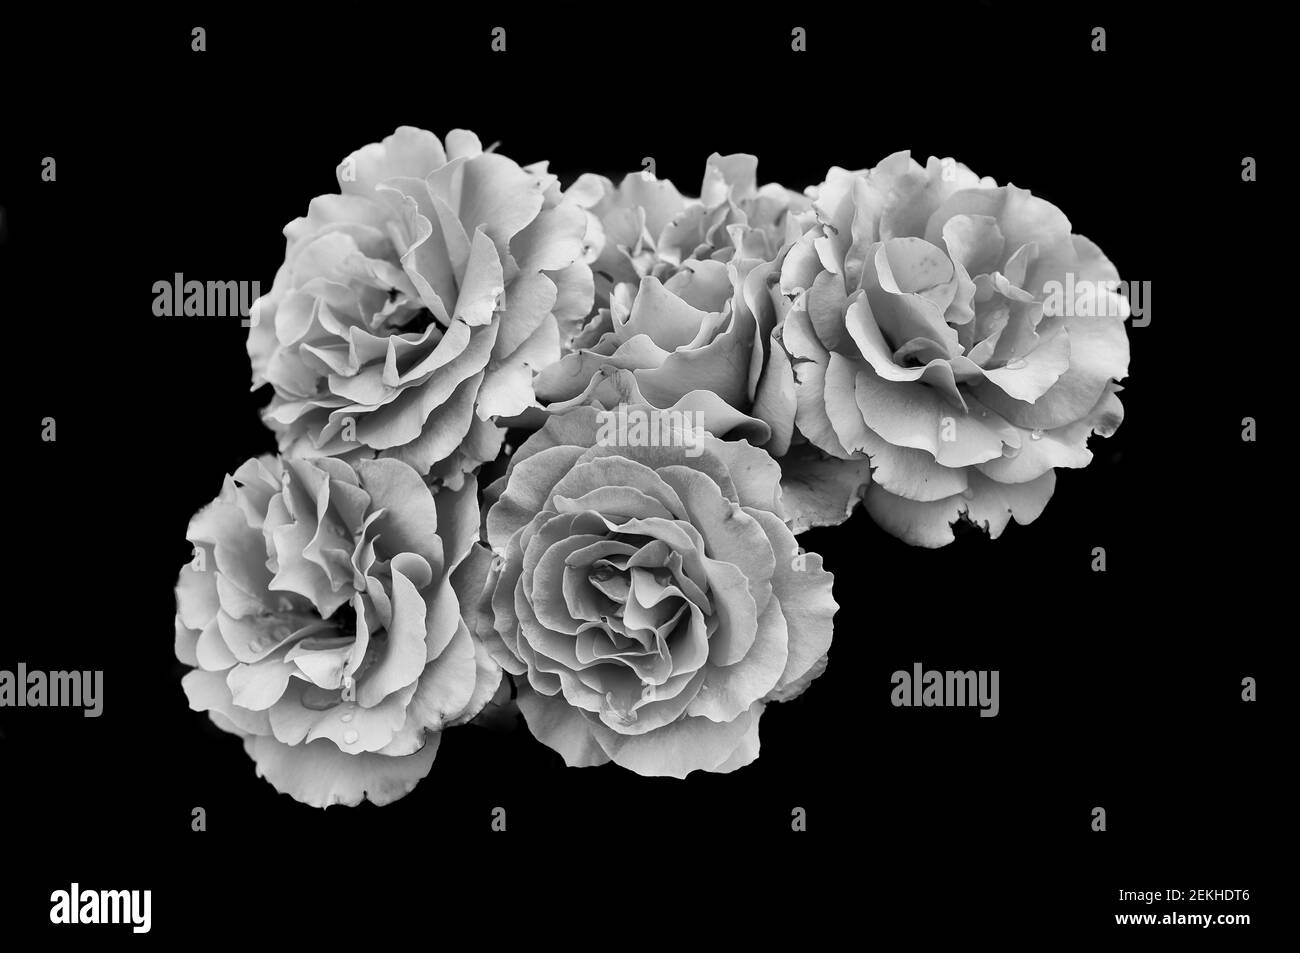 Rose flower heads in black and white Stock Photo